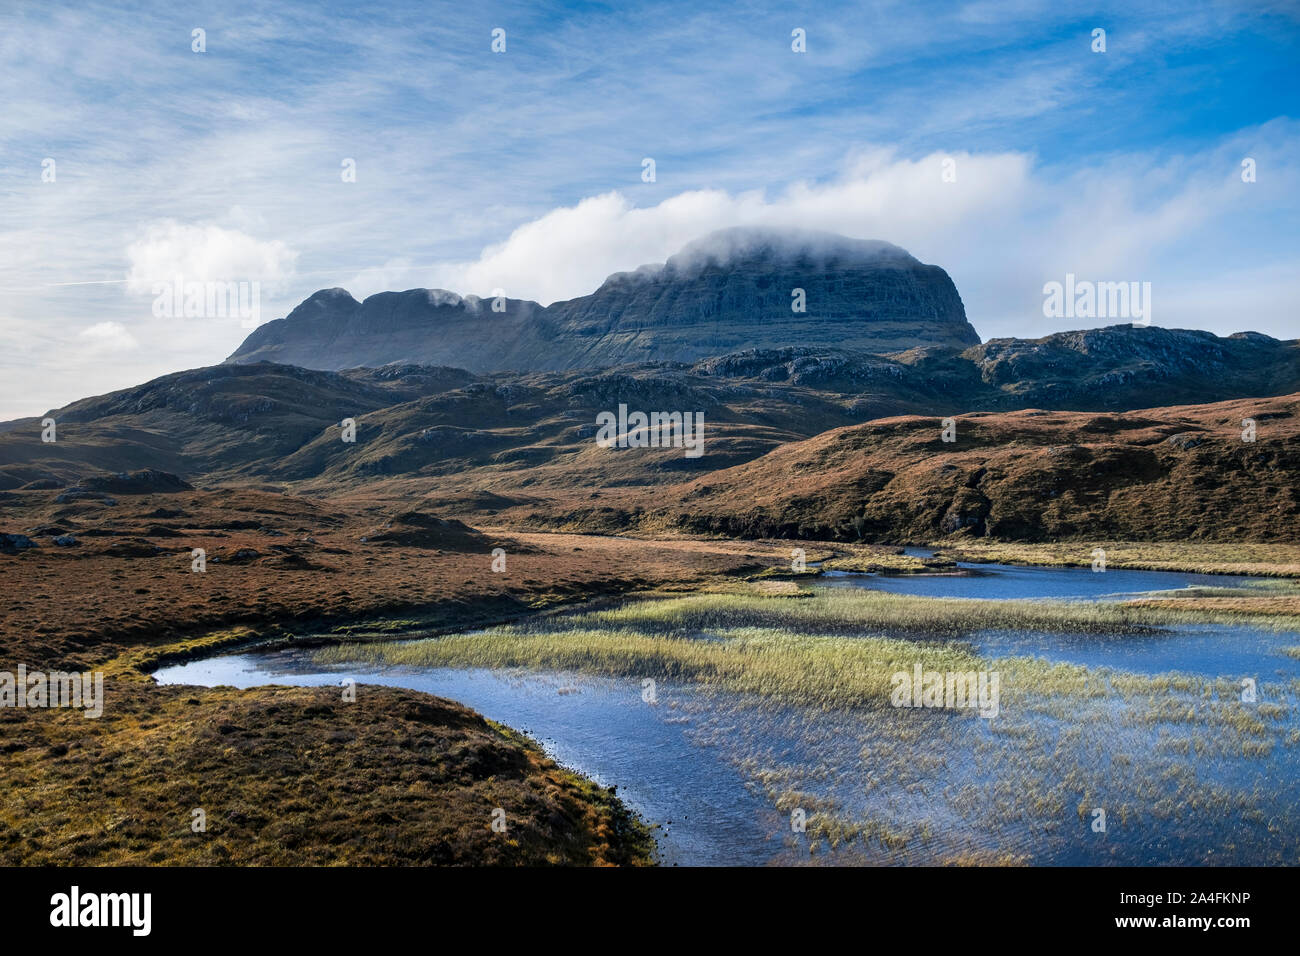 View from Lochan Buidhe, Glencanisp Estate to Suilven mountain in Inverpoly National Nature Reserve Assynt Sutherland, Caisteal Liath summit on right Stock Photo